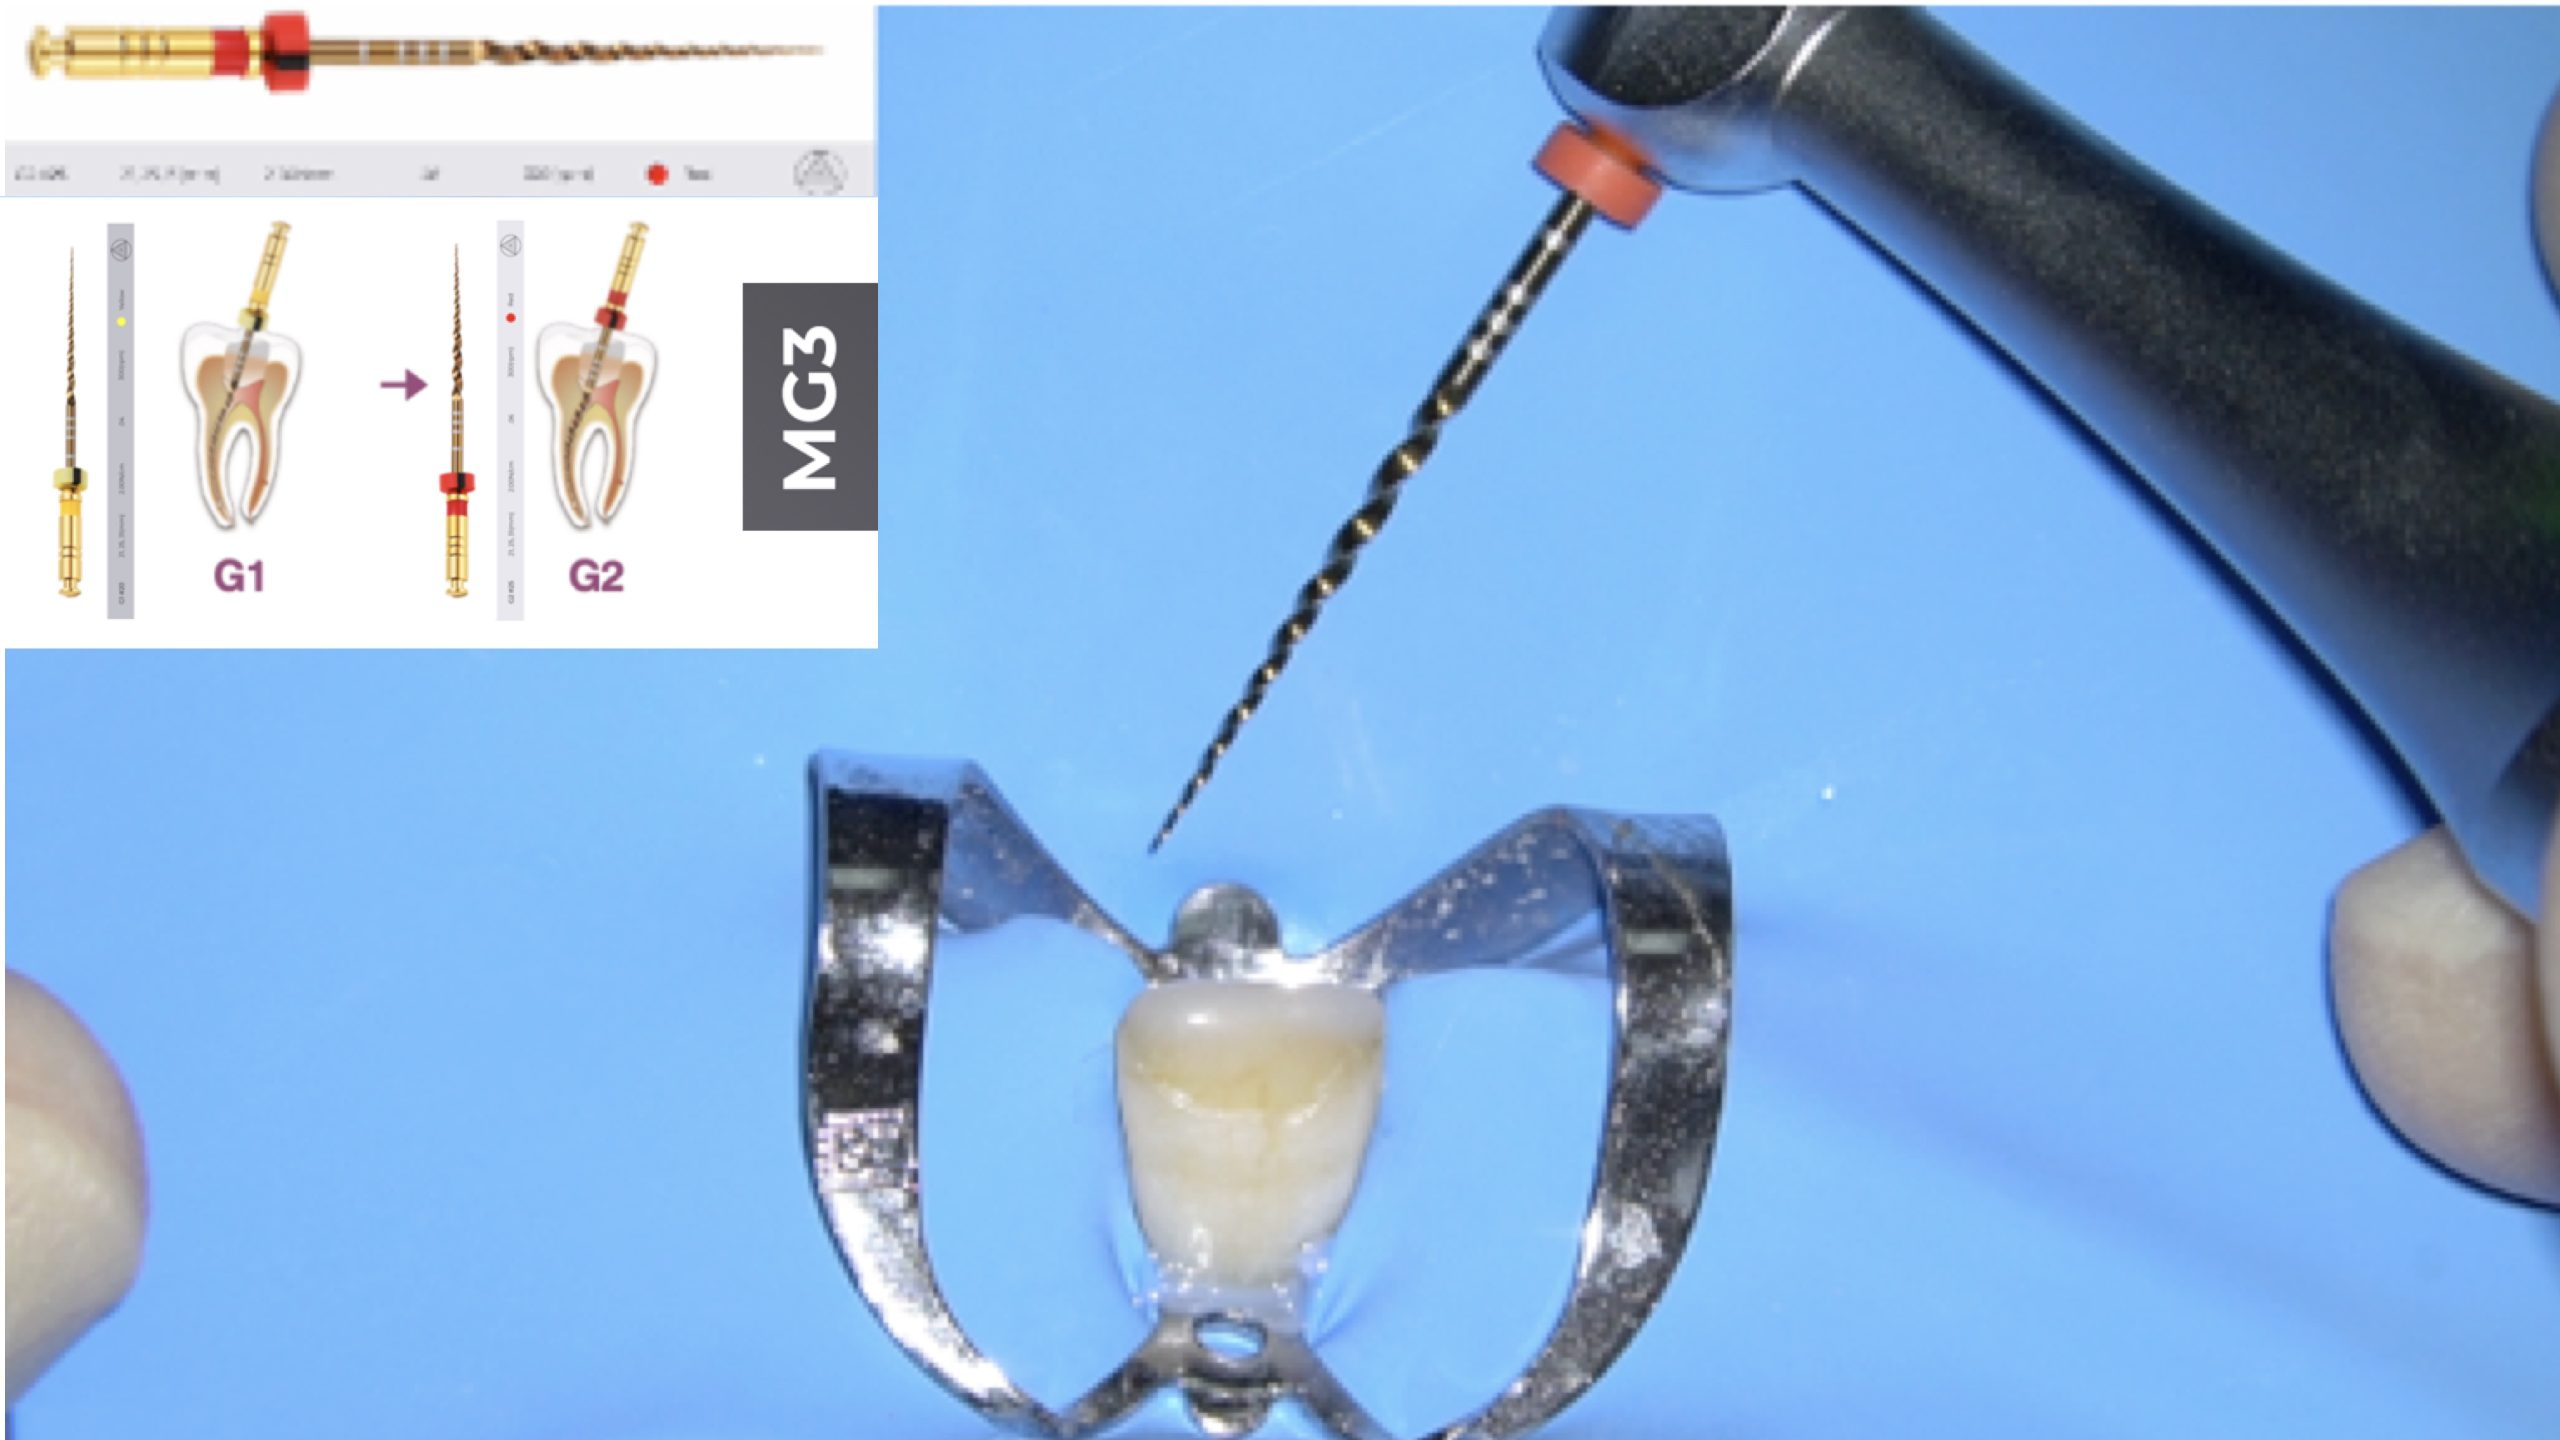 Endodontic Management of Maxillary Central Incisor with apical calcification